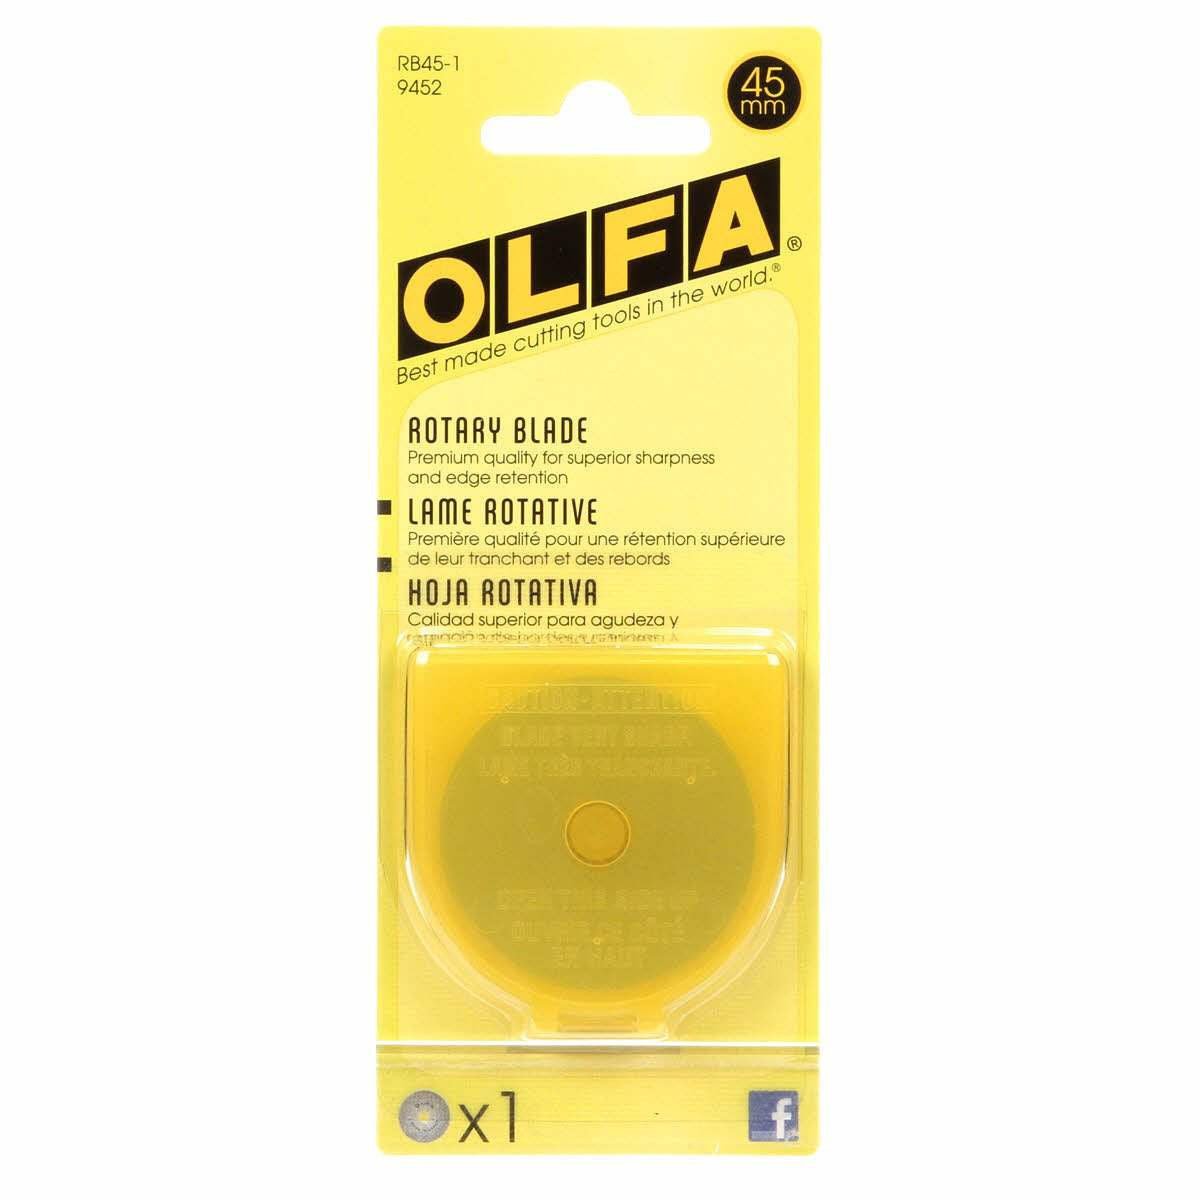 This Olfa rotary blade cuts up to six layers of fabric at a time, saving you precious time. Because the blade is made of tungsten tool steel, it retains its sharp edge, saving you money. The replacement blade fits any Olfa 45mm rotary cutter. Made from high-quality tungsten tool steel. Fits any Olfa 45mm rotary cutter. Package contains 1 blade.